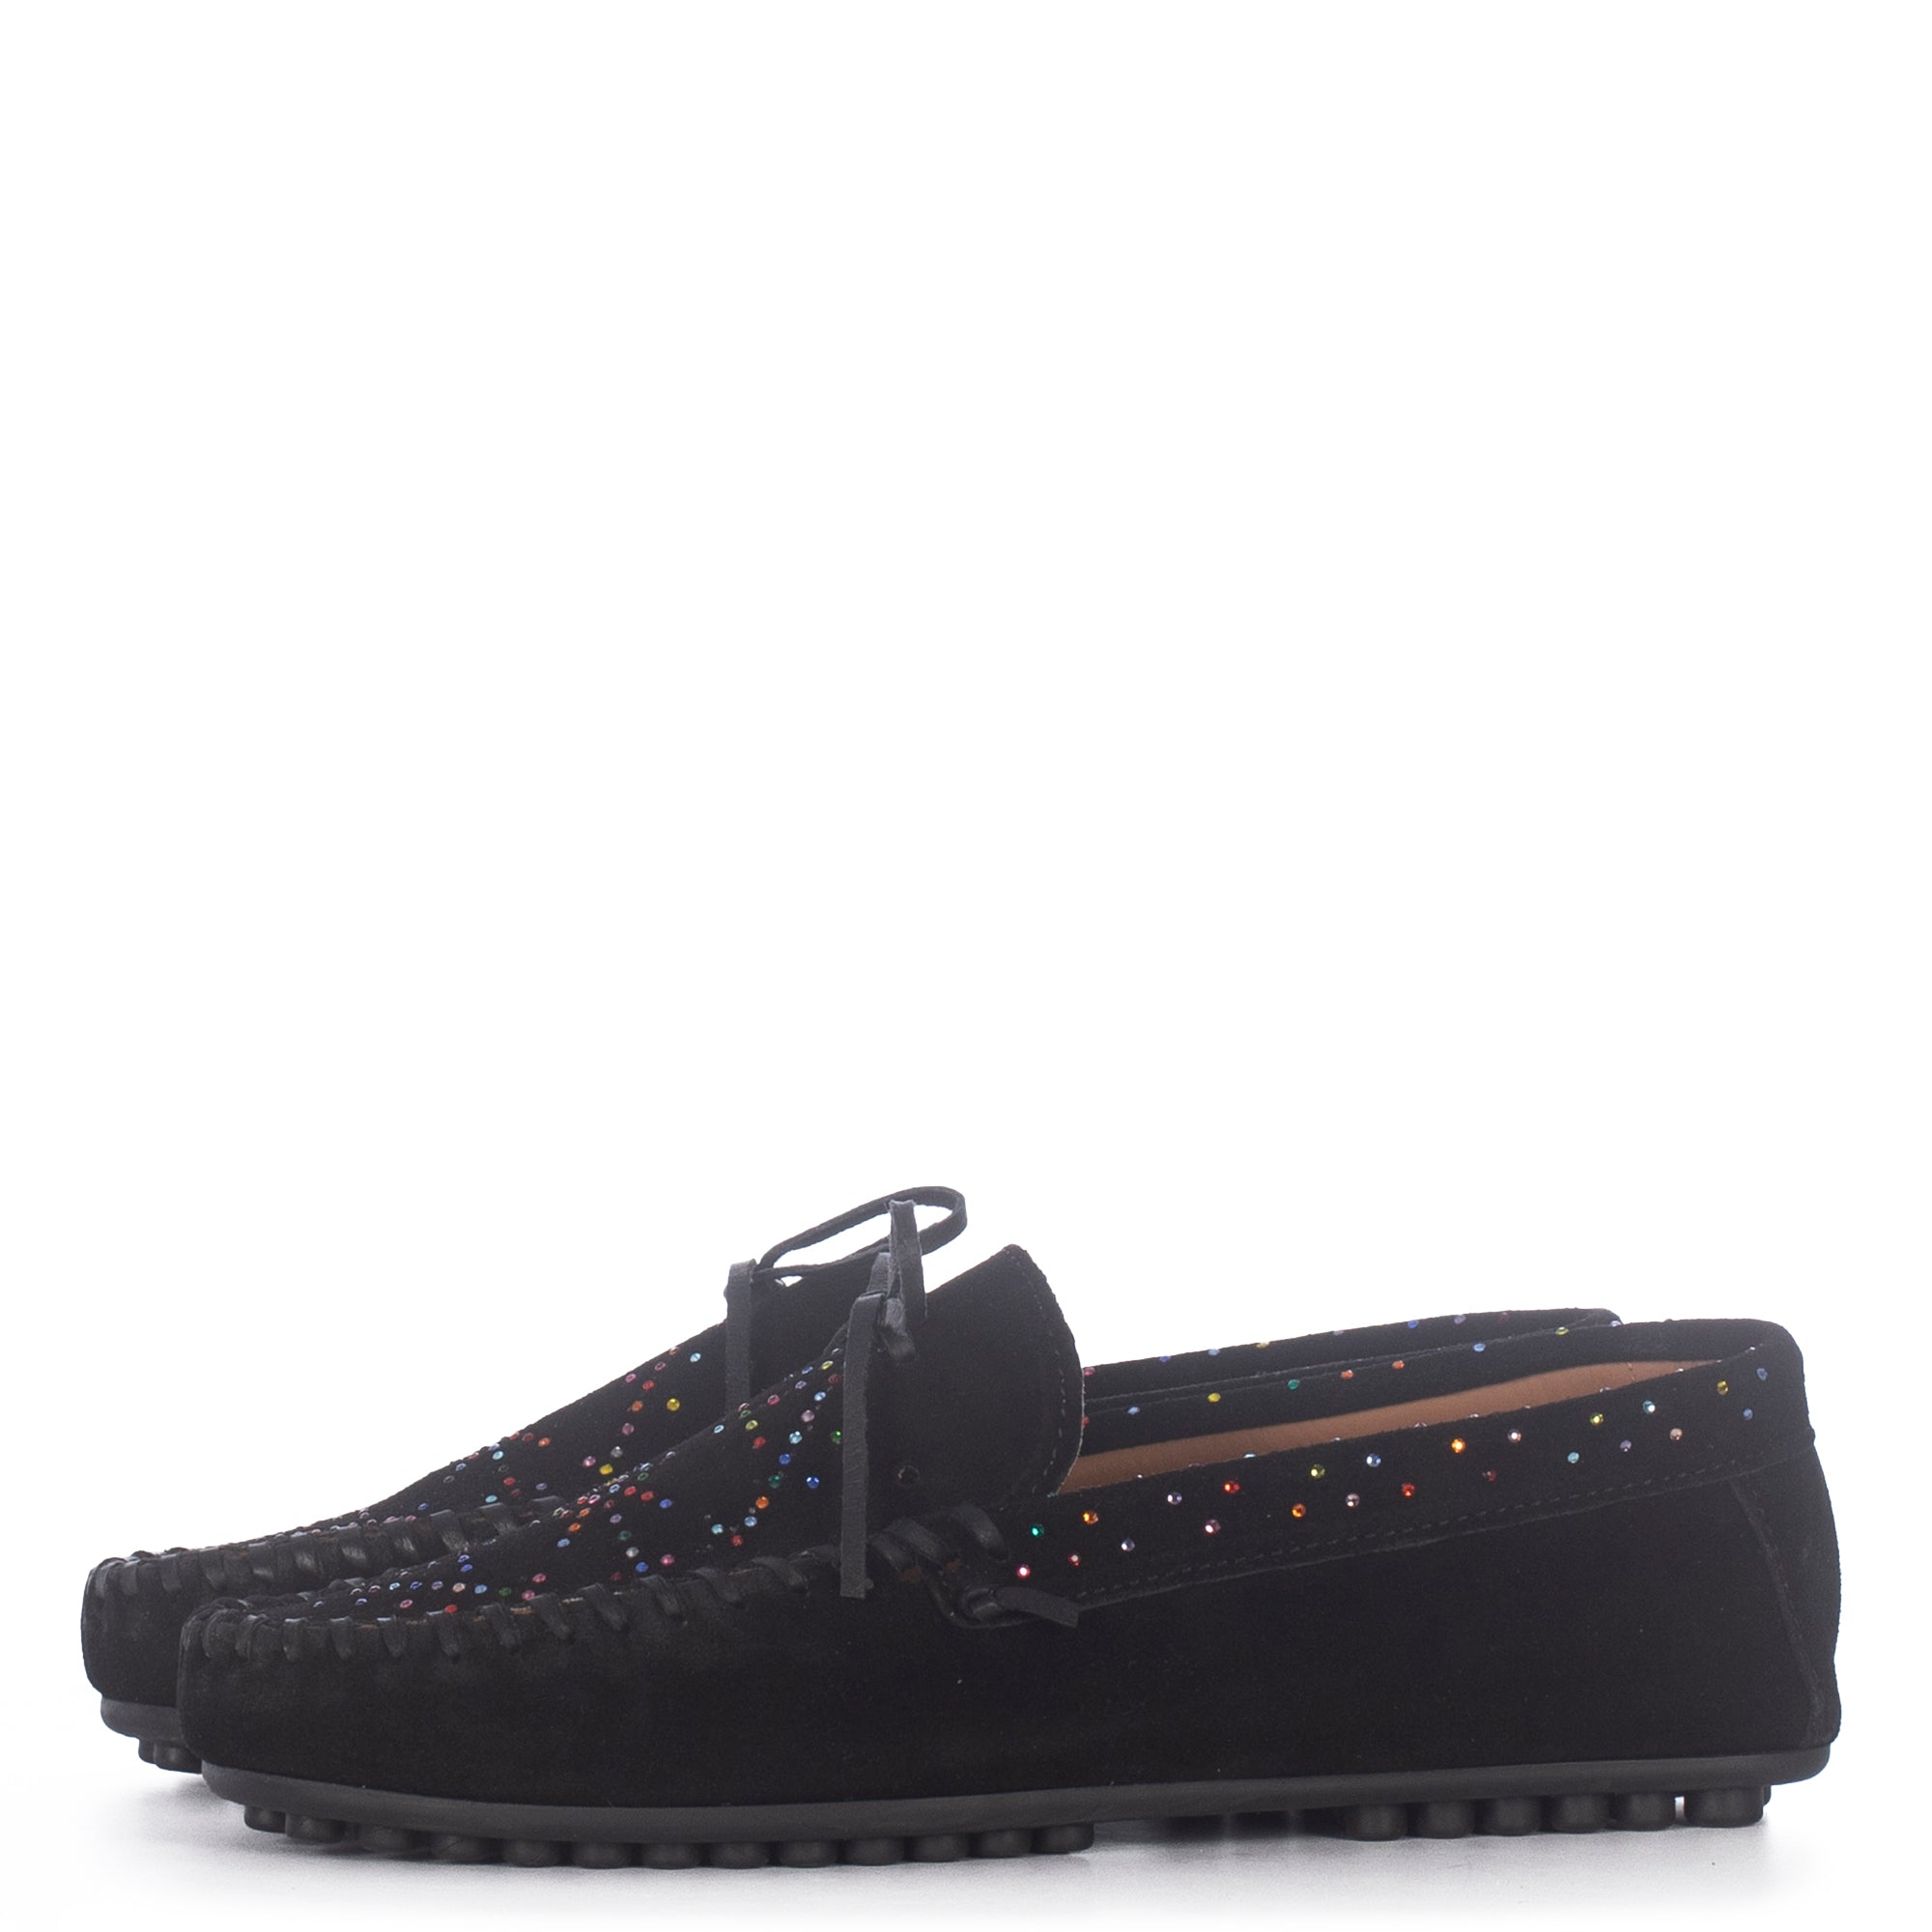 QUECHUA BLACK LOAFERS MULTICOLORED STRASS